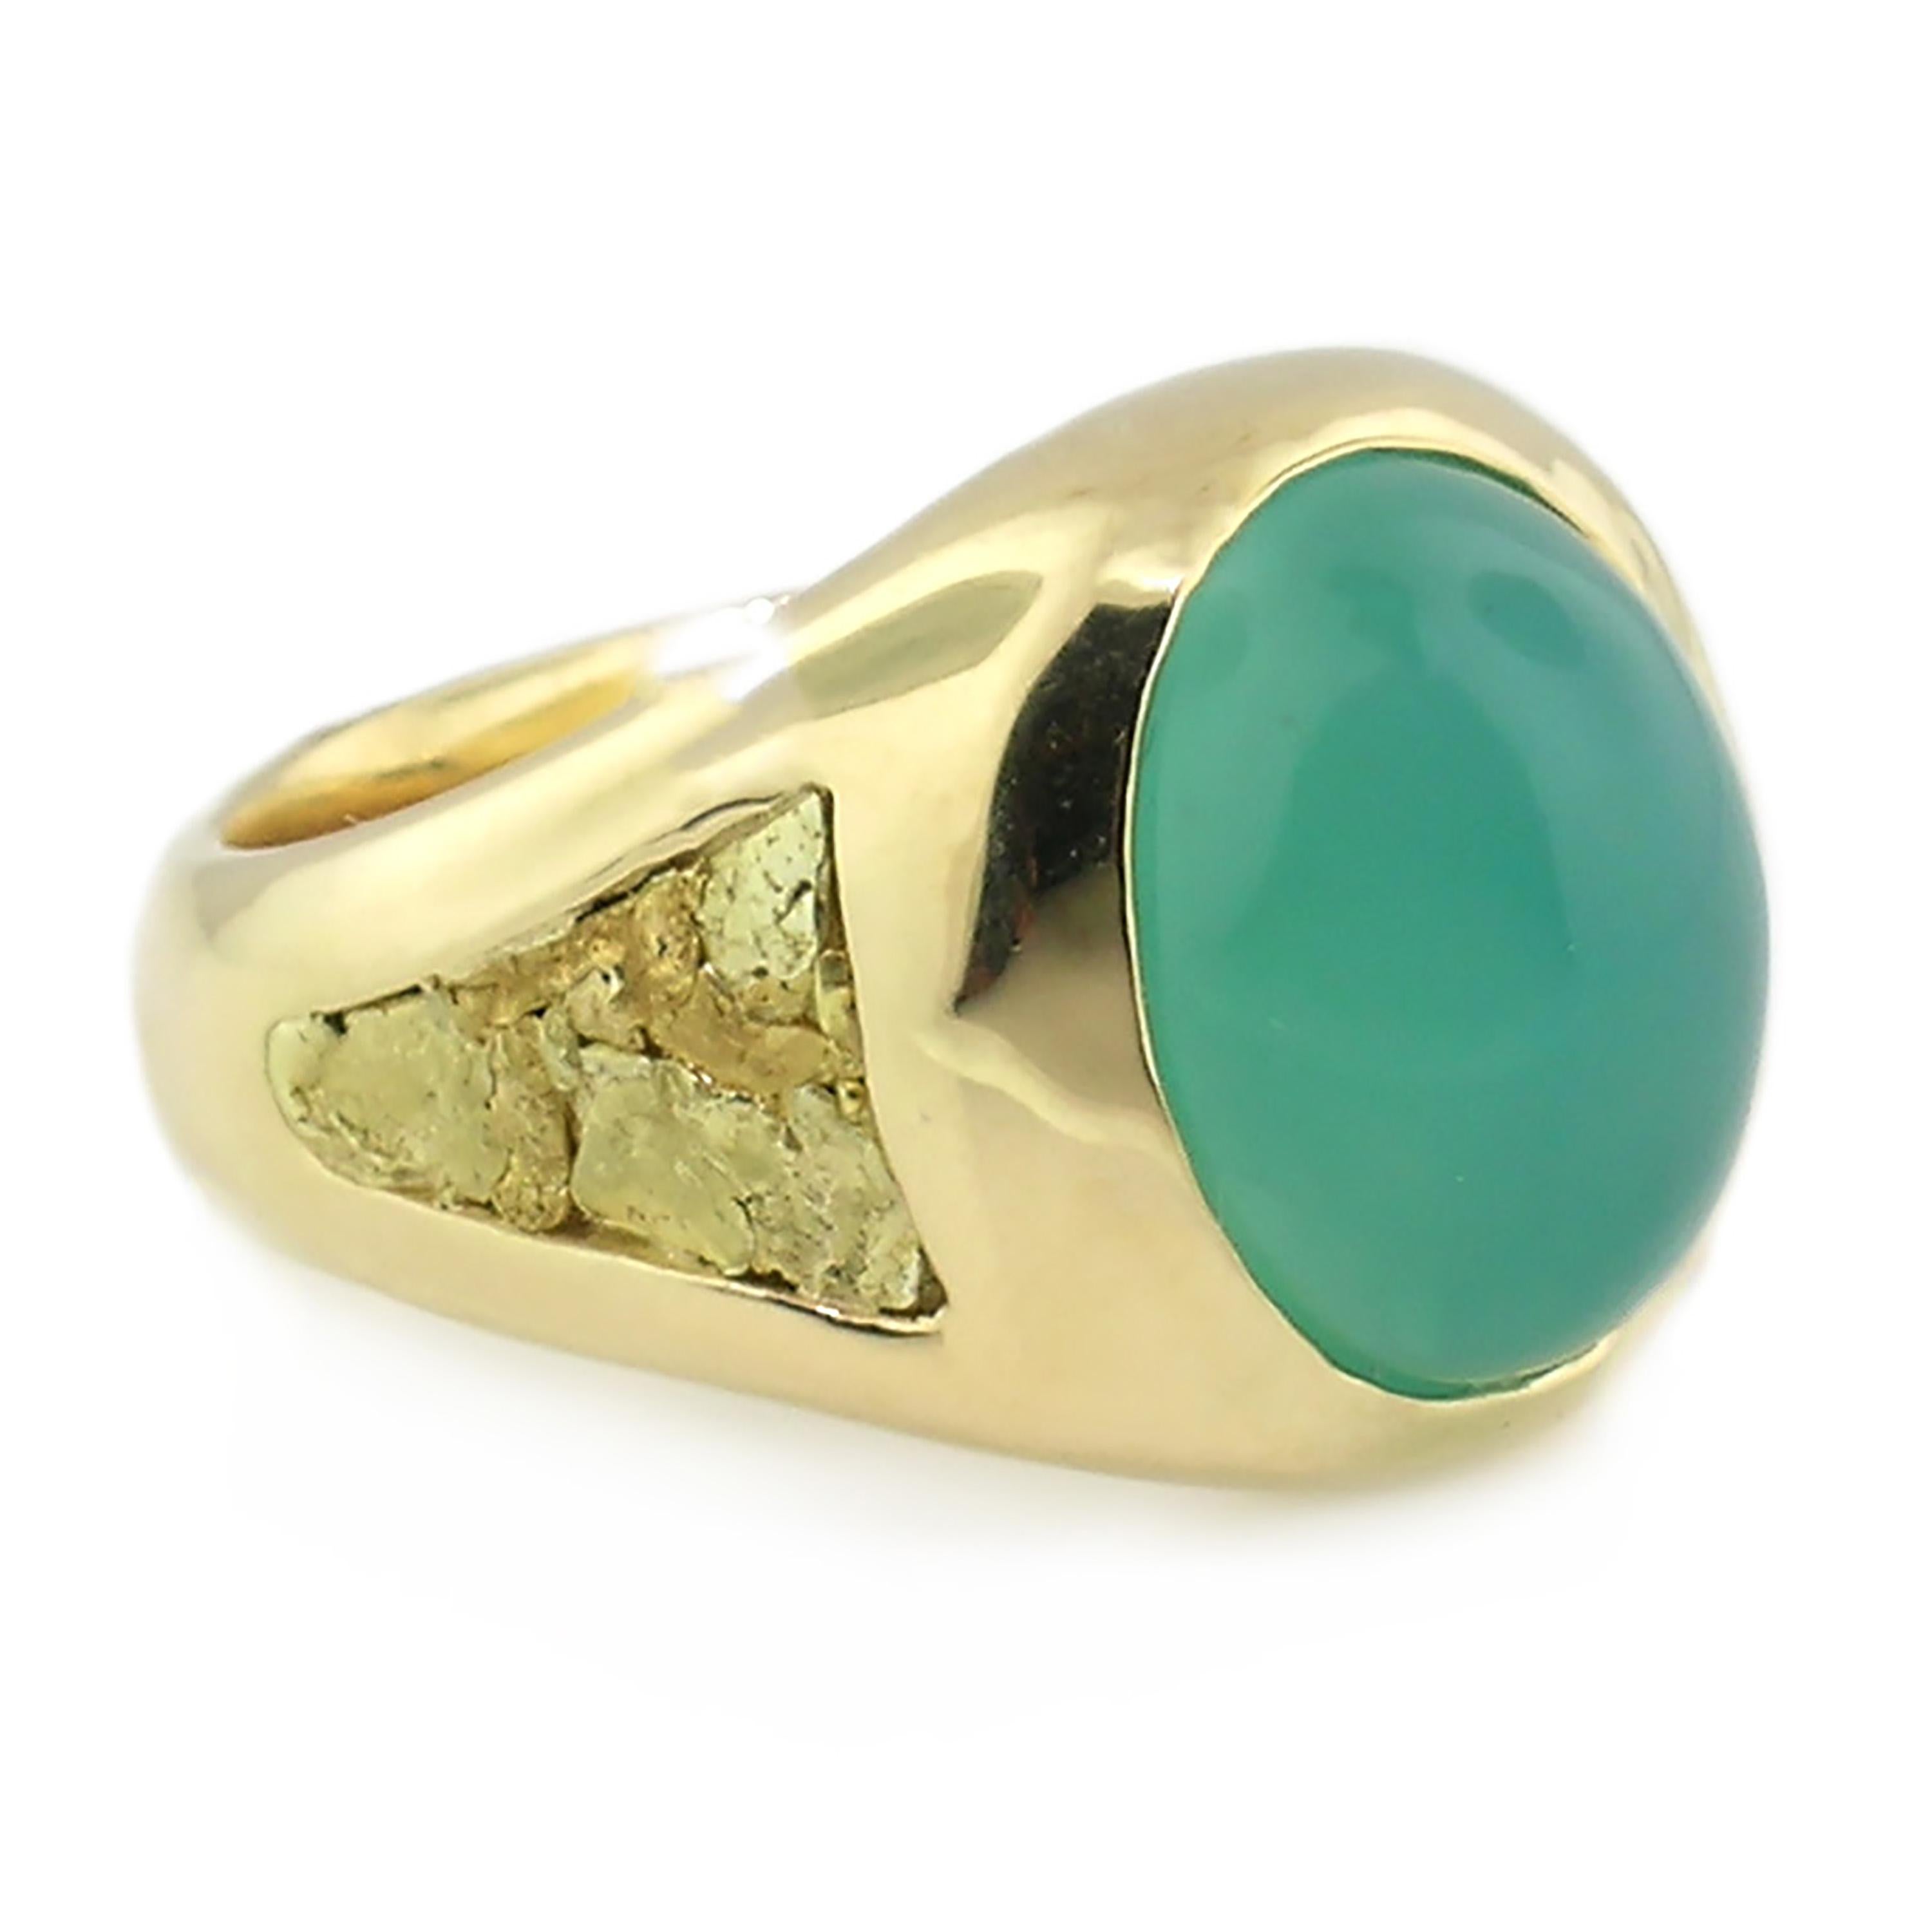 Oval Cut Chrome Chalcedony and Gold Nugget 18 Karat Men's Ring